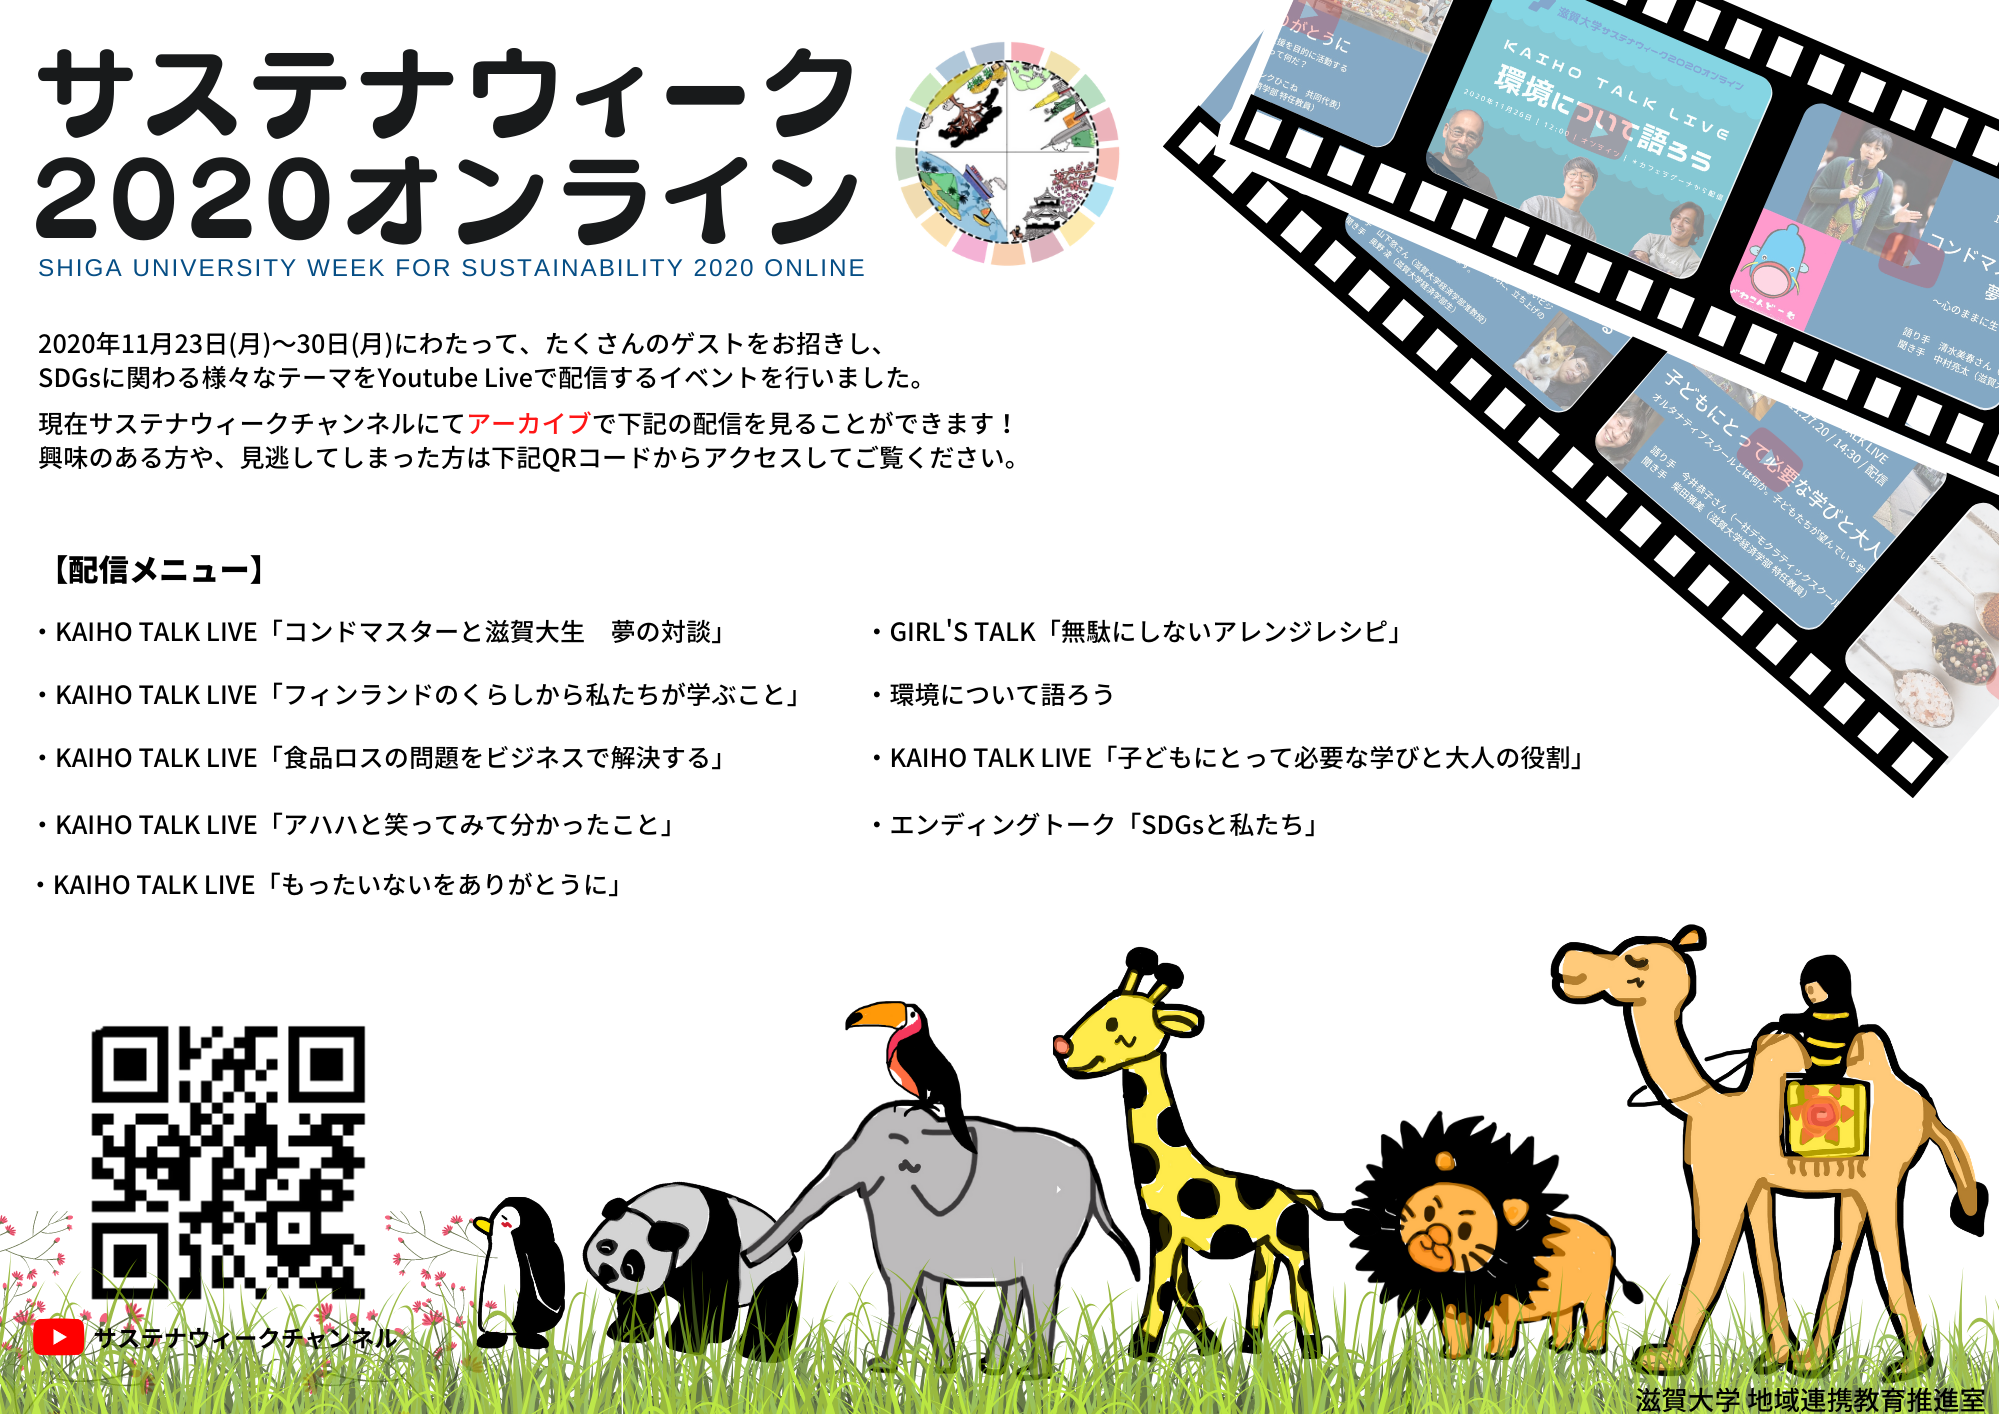 SHIGA UNIVERCITY week for sustainability 2020 onlineのコピーのコピー.png